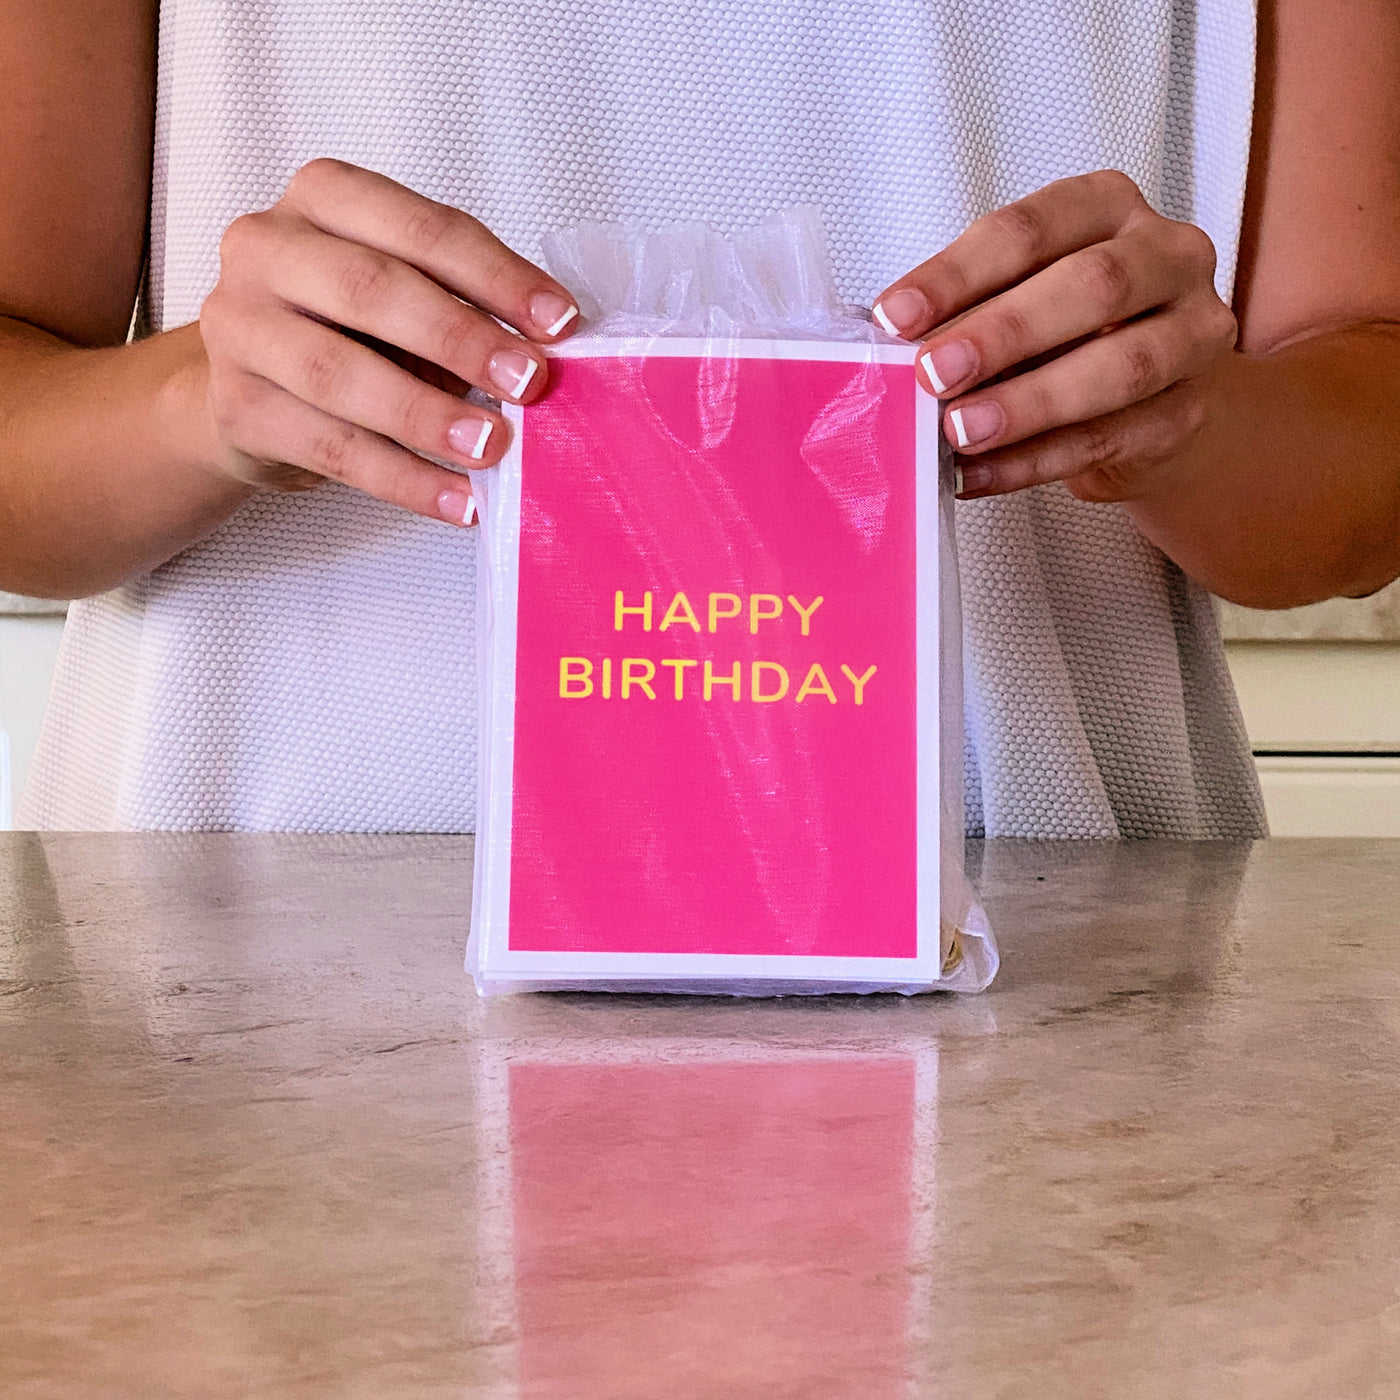 Pink and Yellow Birthday Banner